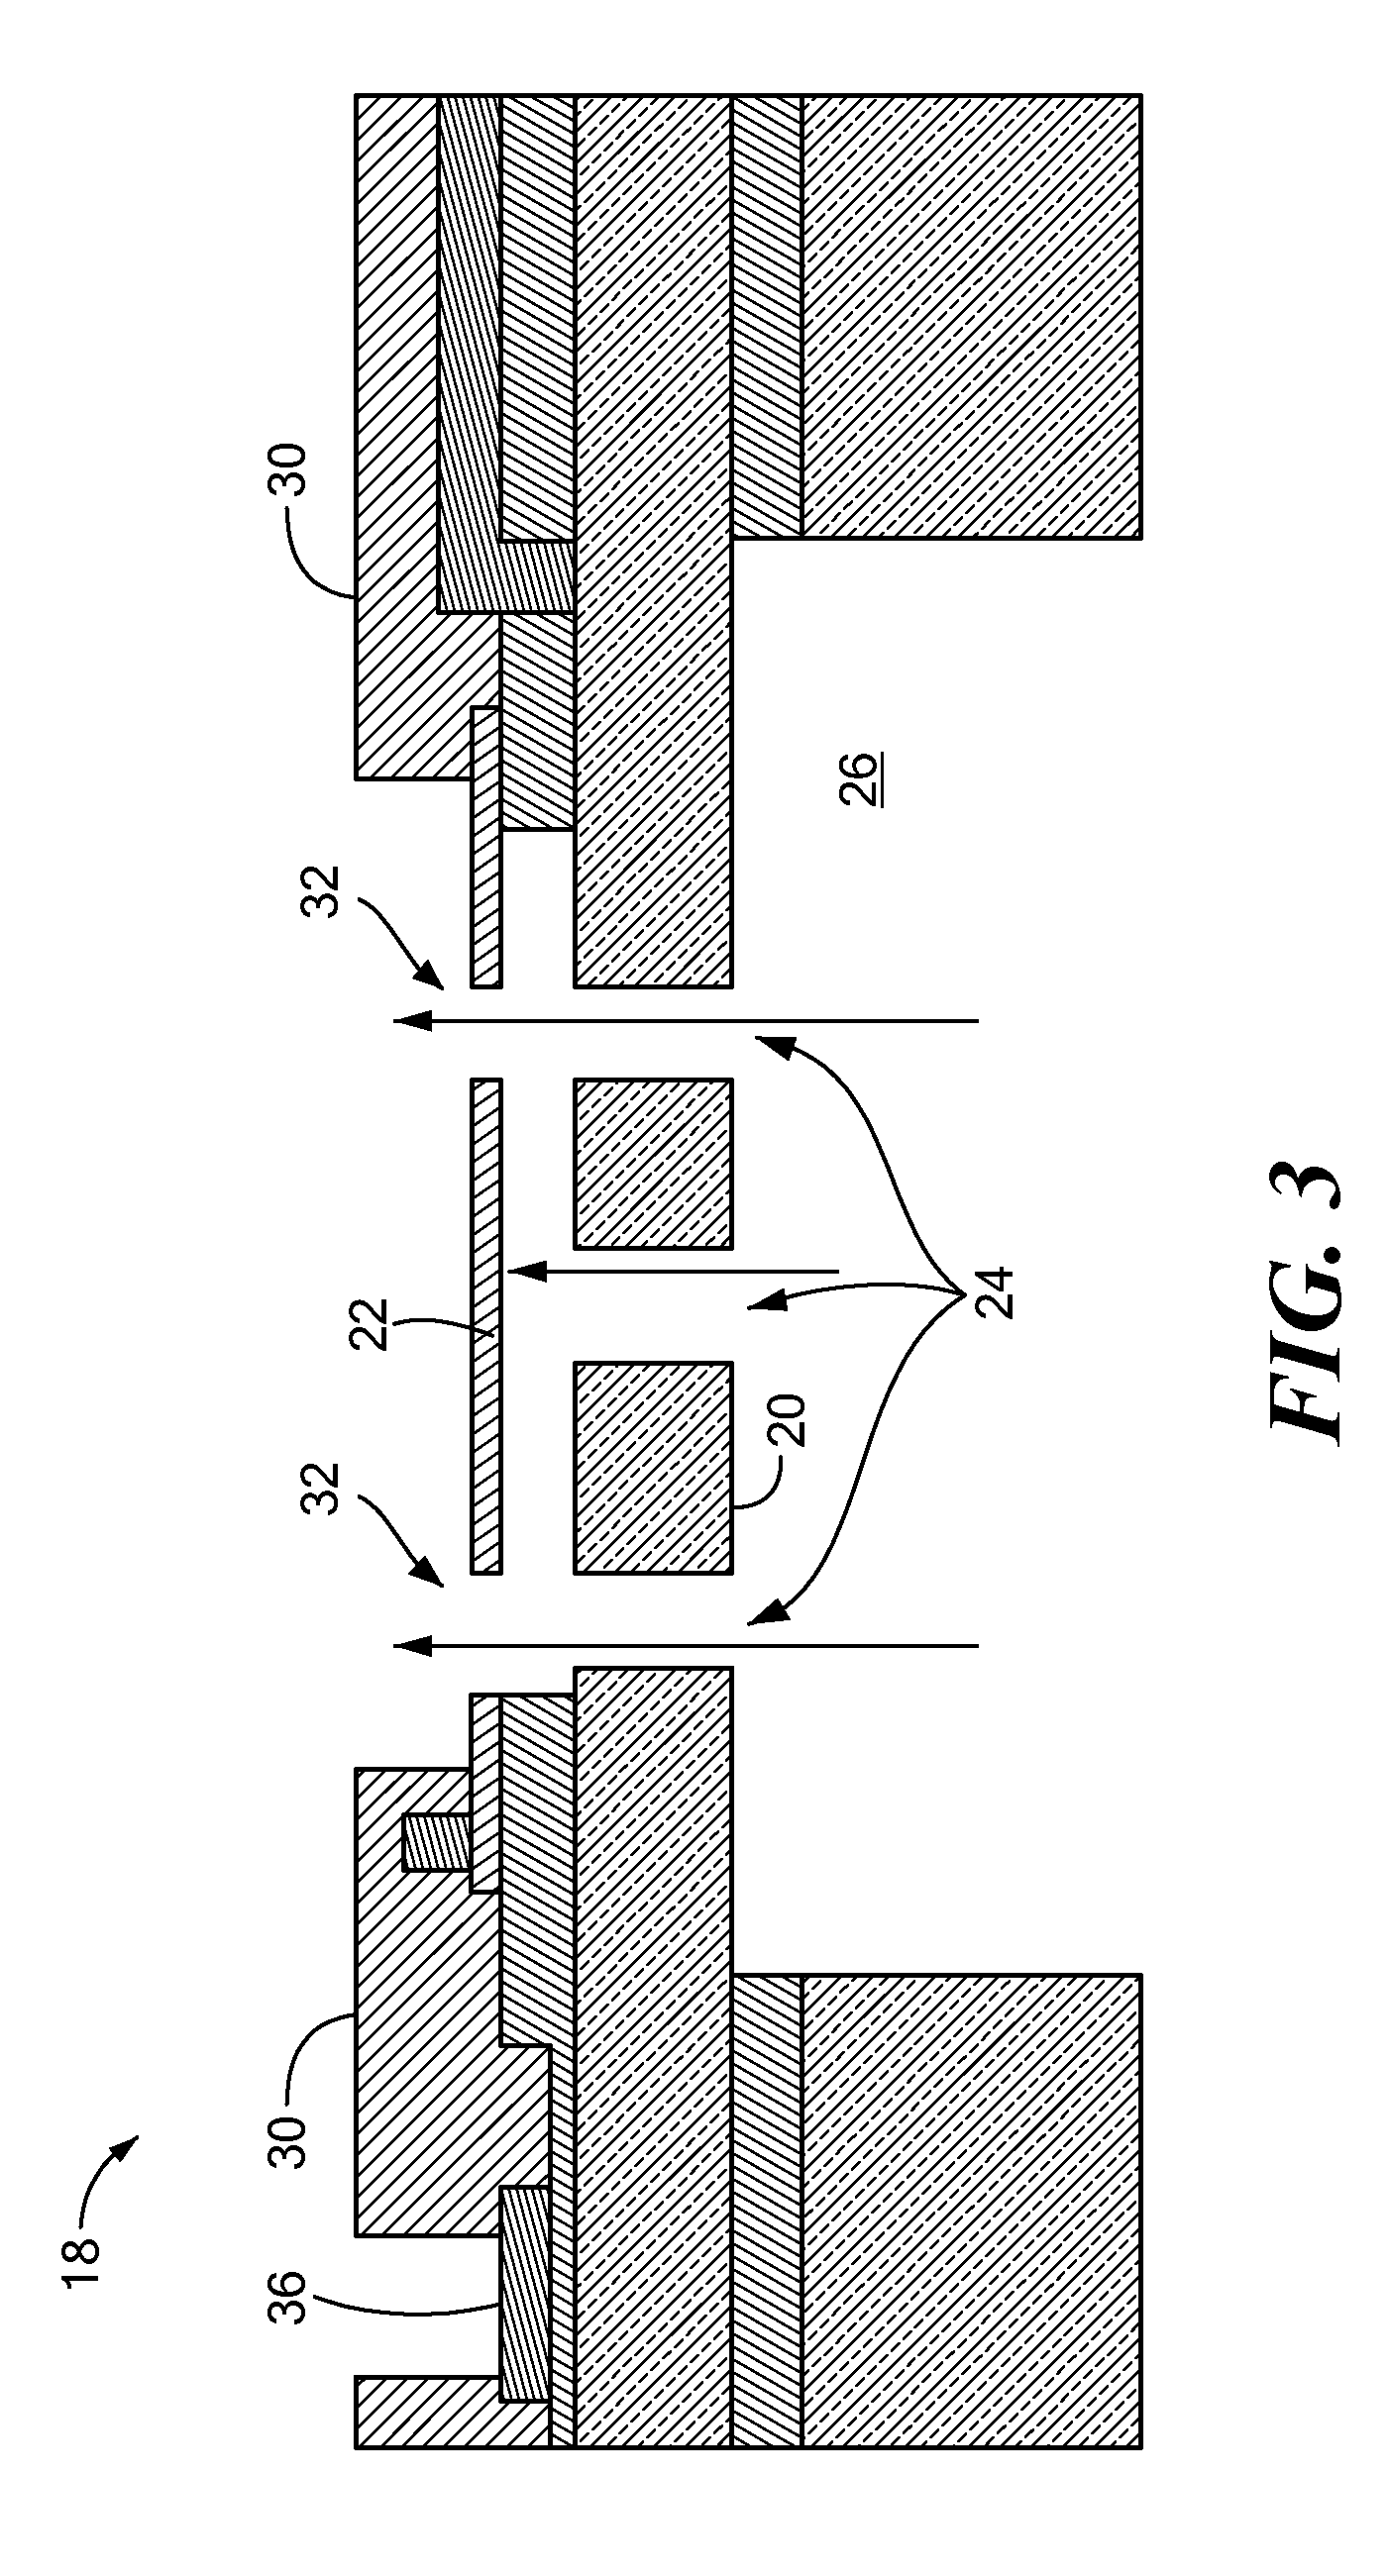 Microphone with Aligned Apertures